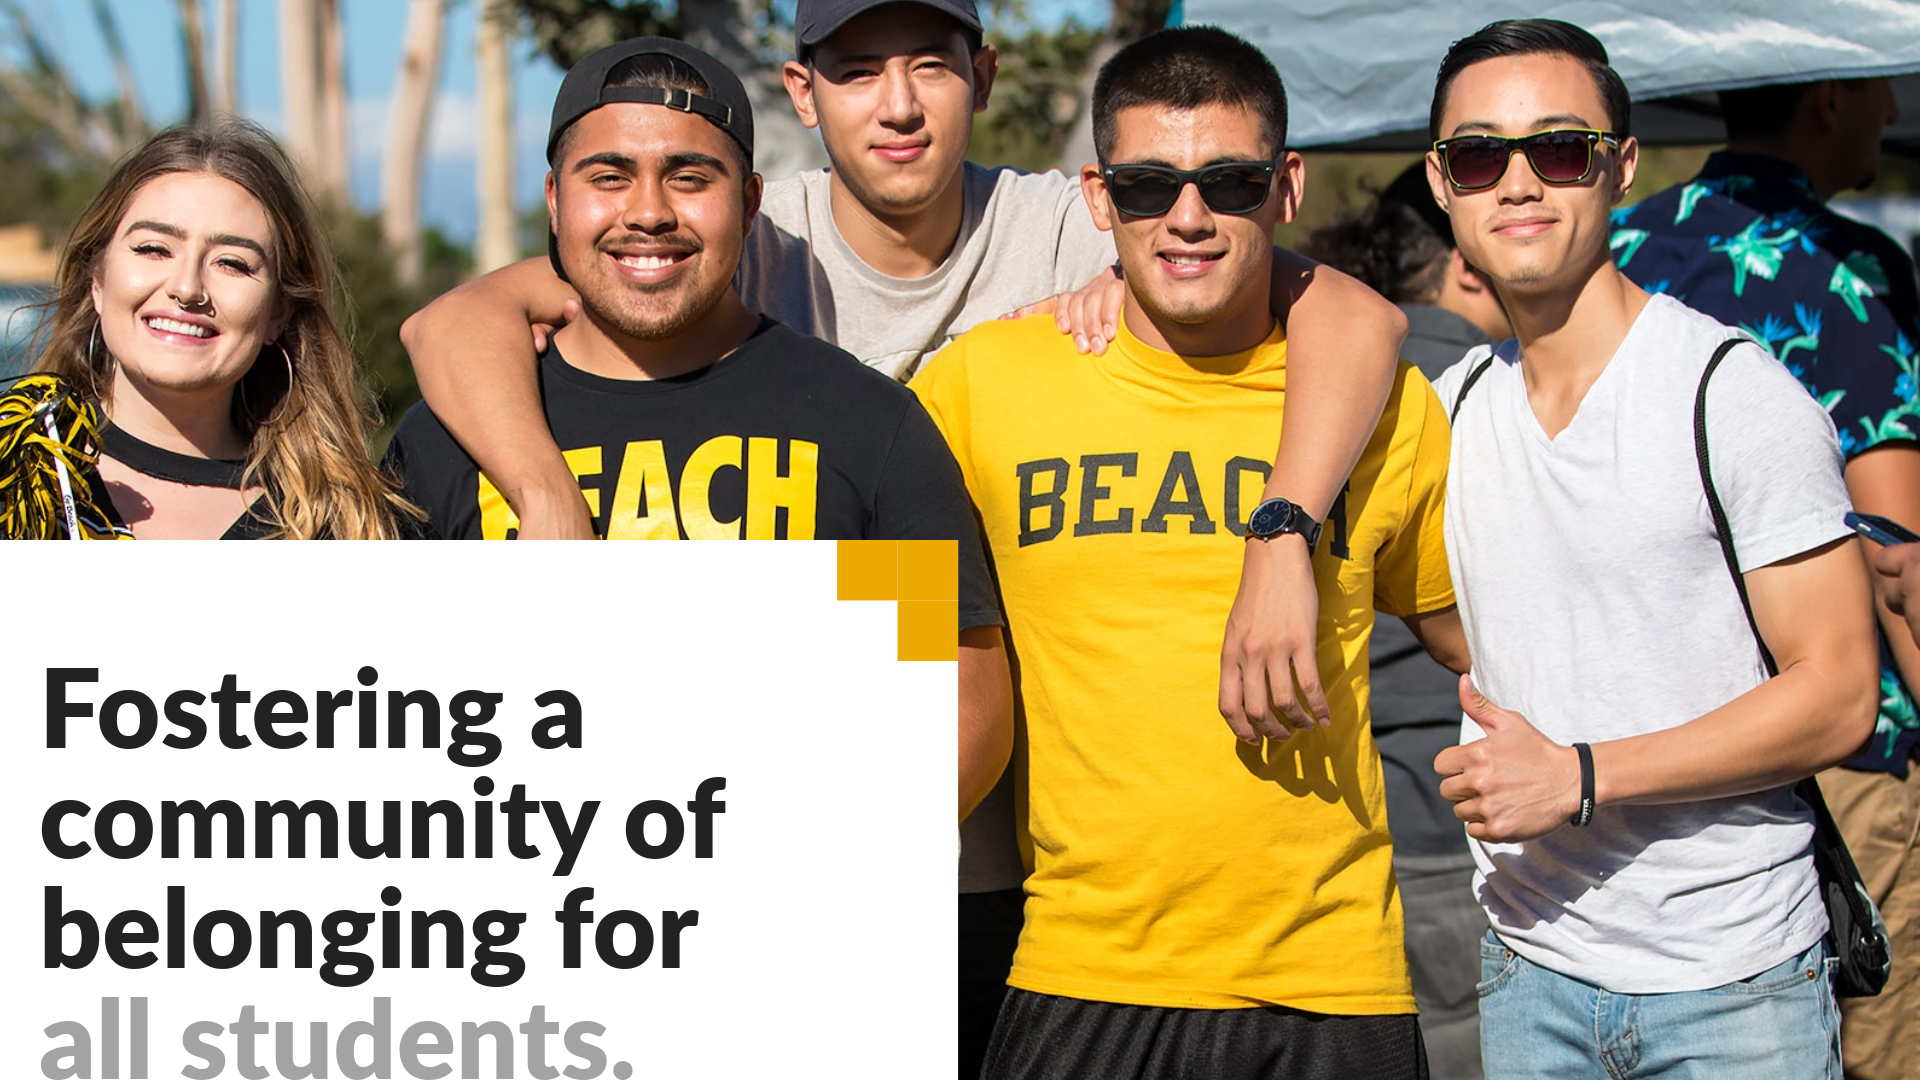 Fostering a community of belonging for all students. Image shows a group of students in CSULB gear smiling. 